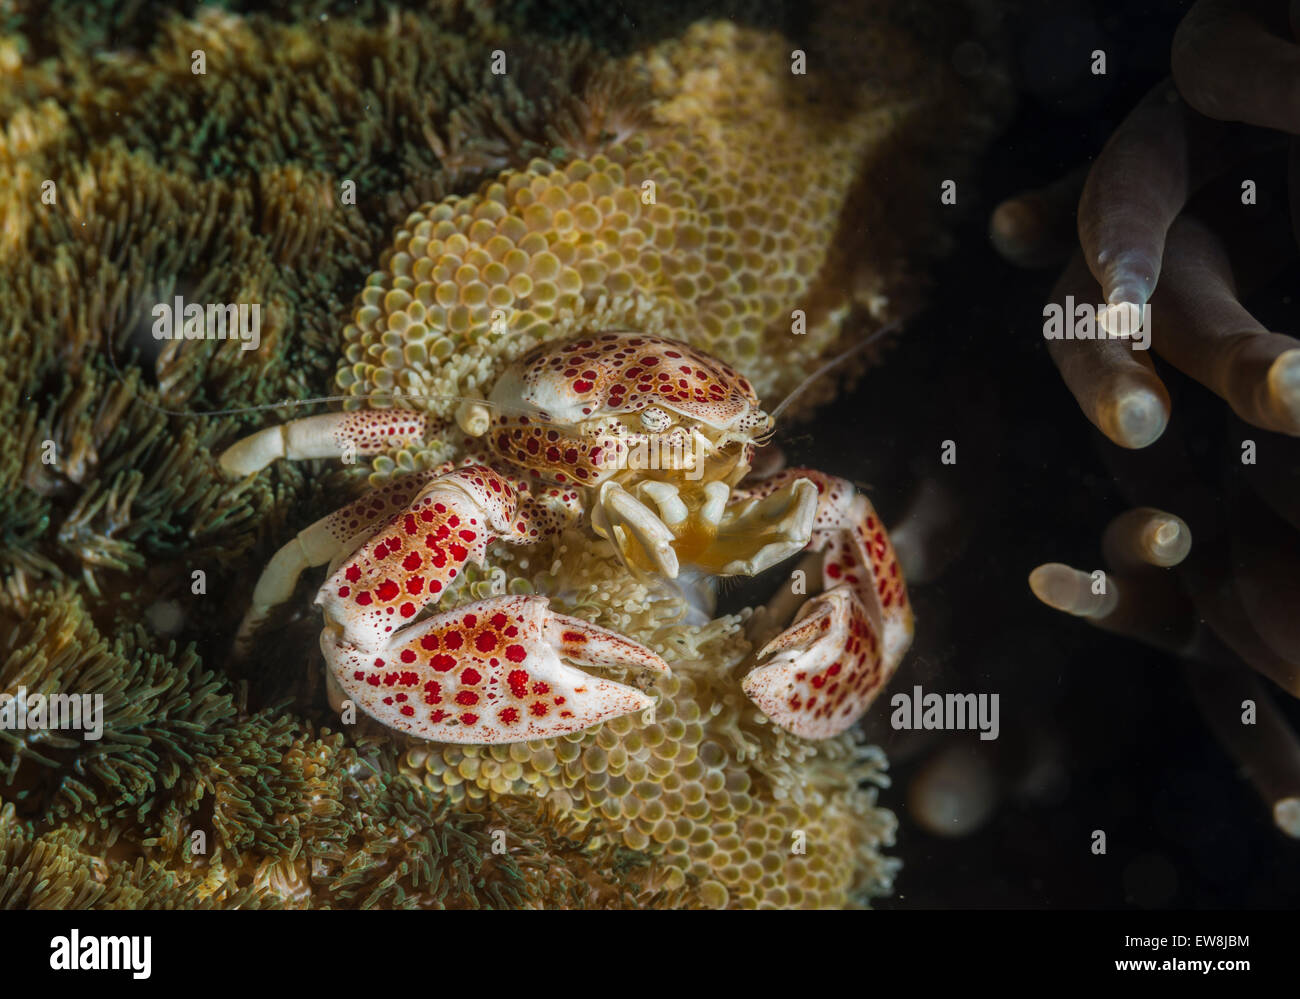 Porcelain crab on an anemone Stock Photo